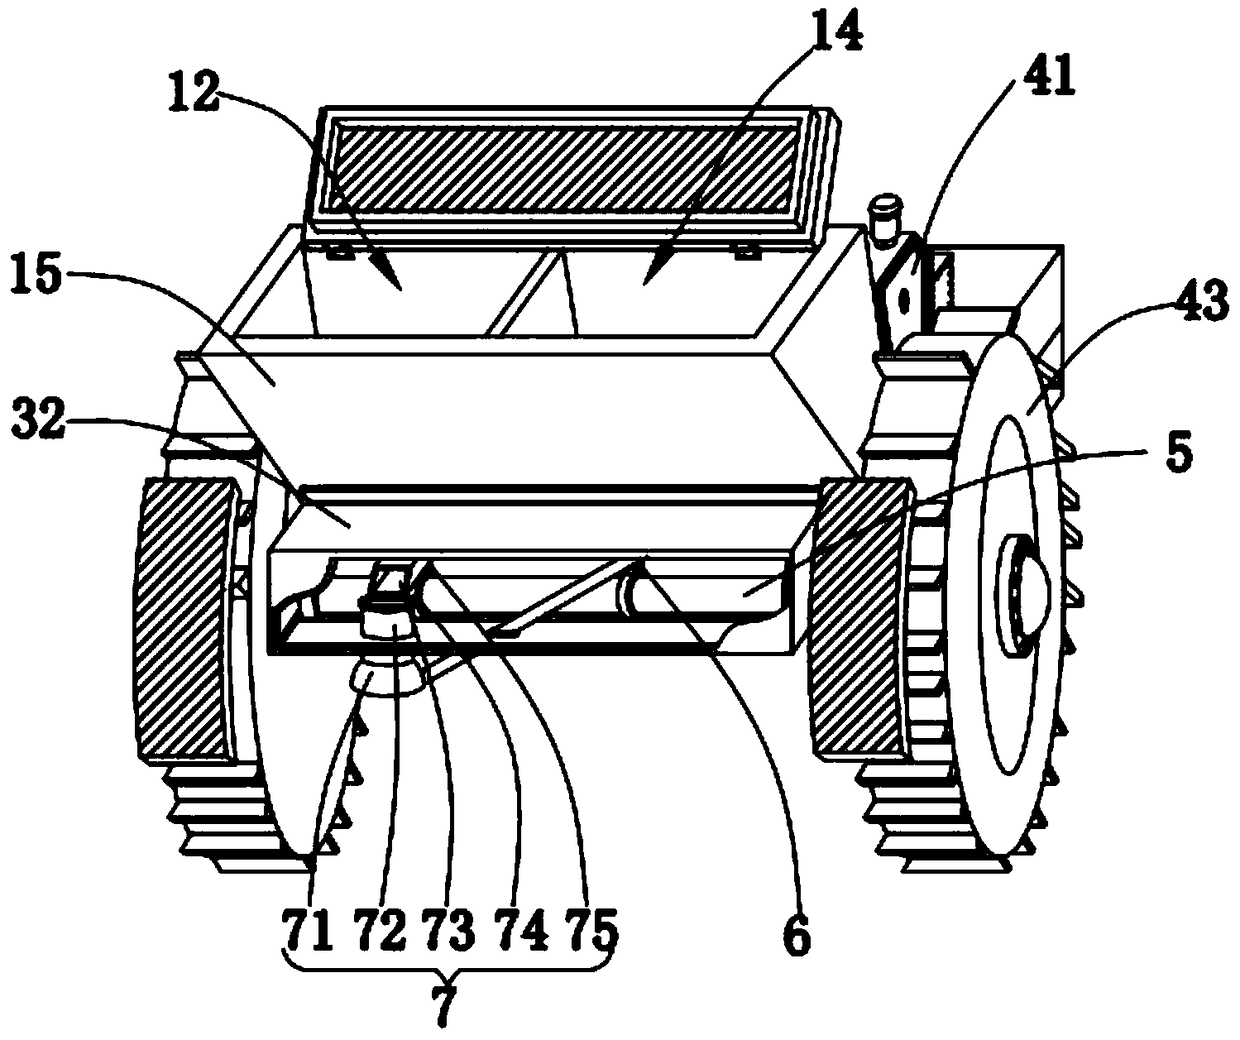 Rotary tillage ridging sowing and fertilization all-in-one machine